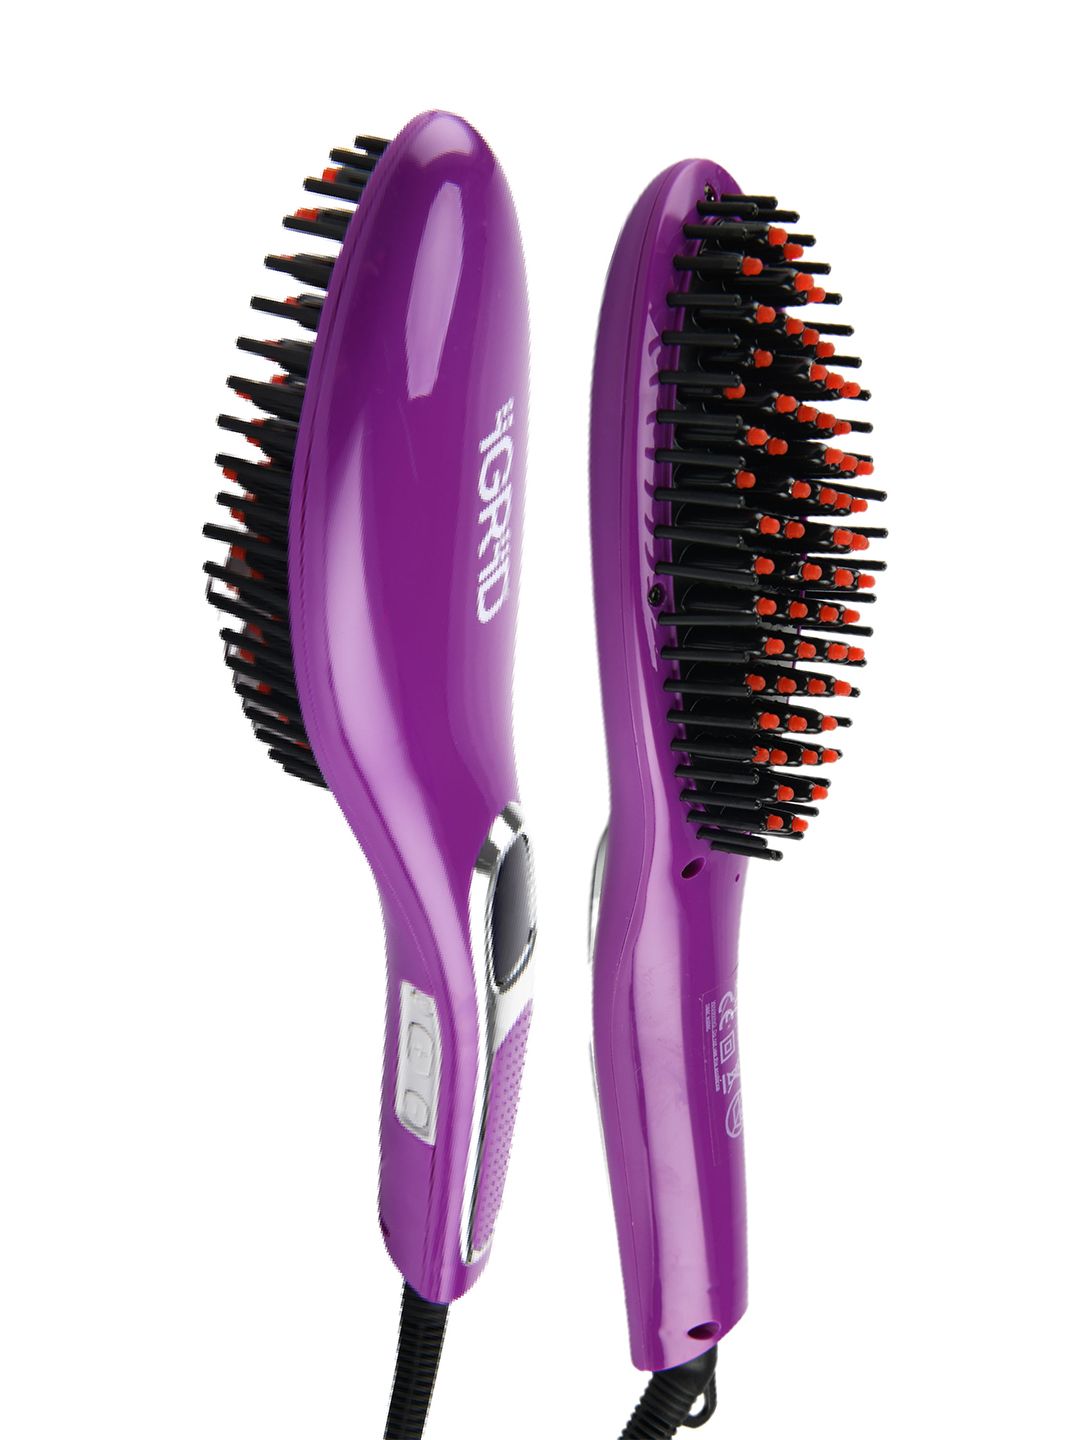 iGRiD IG-1099 Ionic Hair Straightener Brush with Temperature Control & LCD Display -Purple Price in India